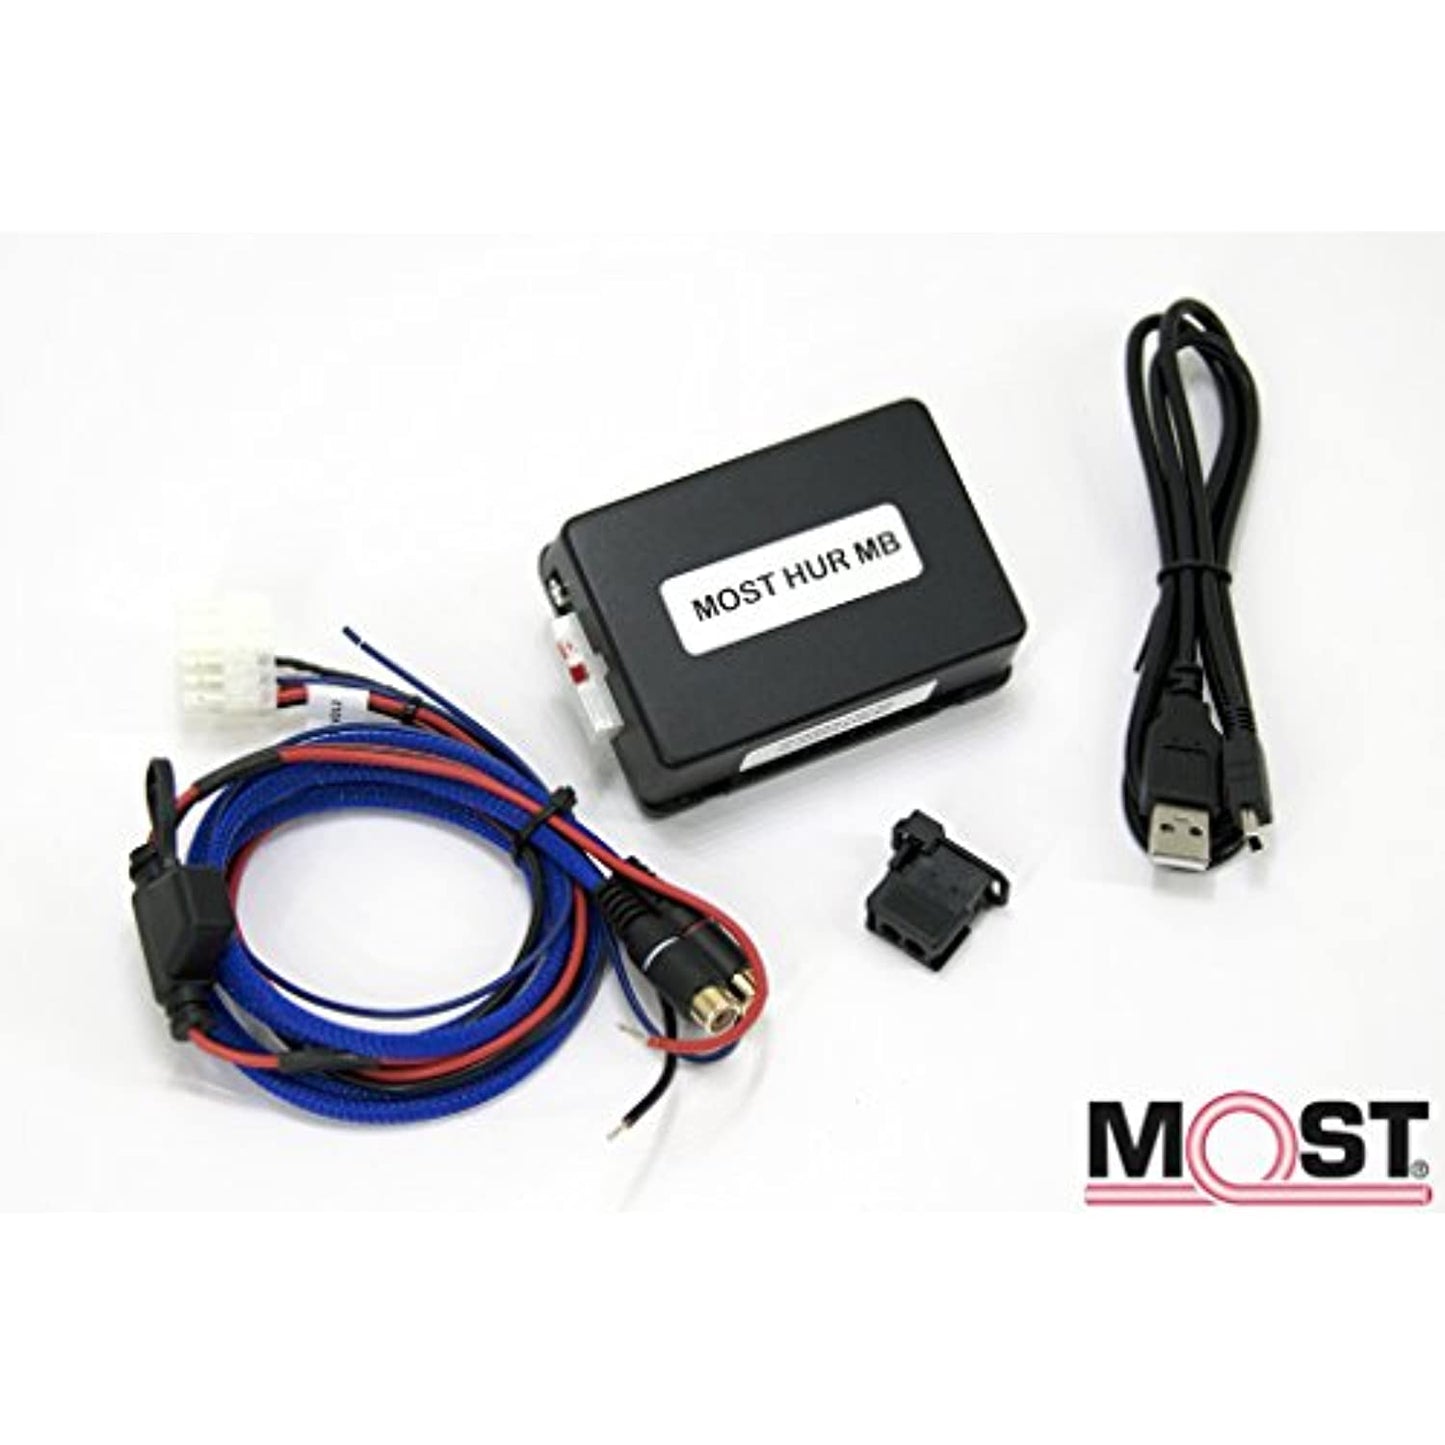 NAV-TV NTV-KIT501 Radio Replacement Interface for select 2004-2008 vehicles from Mercedes-Benz Equipped with the M.O.S.T. Fiber Optic System